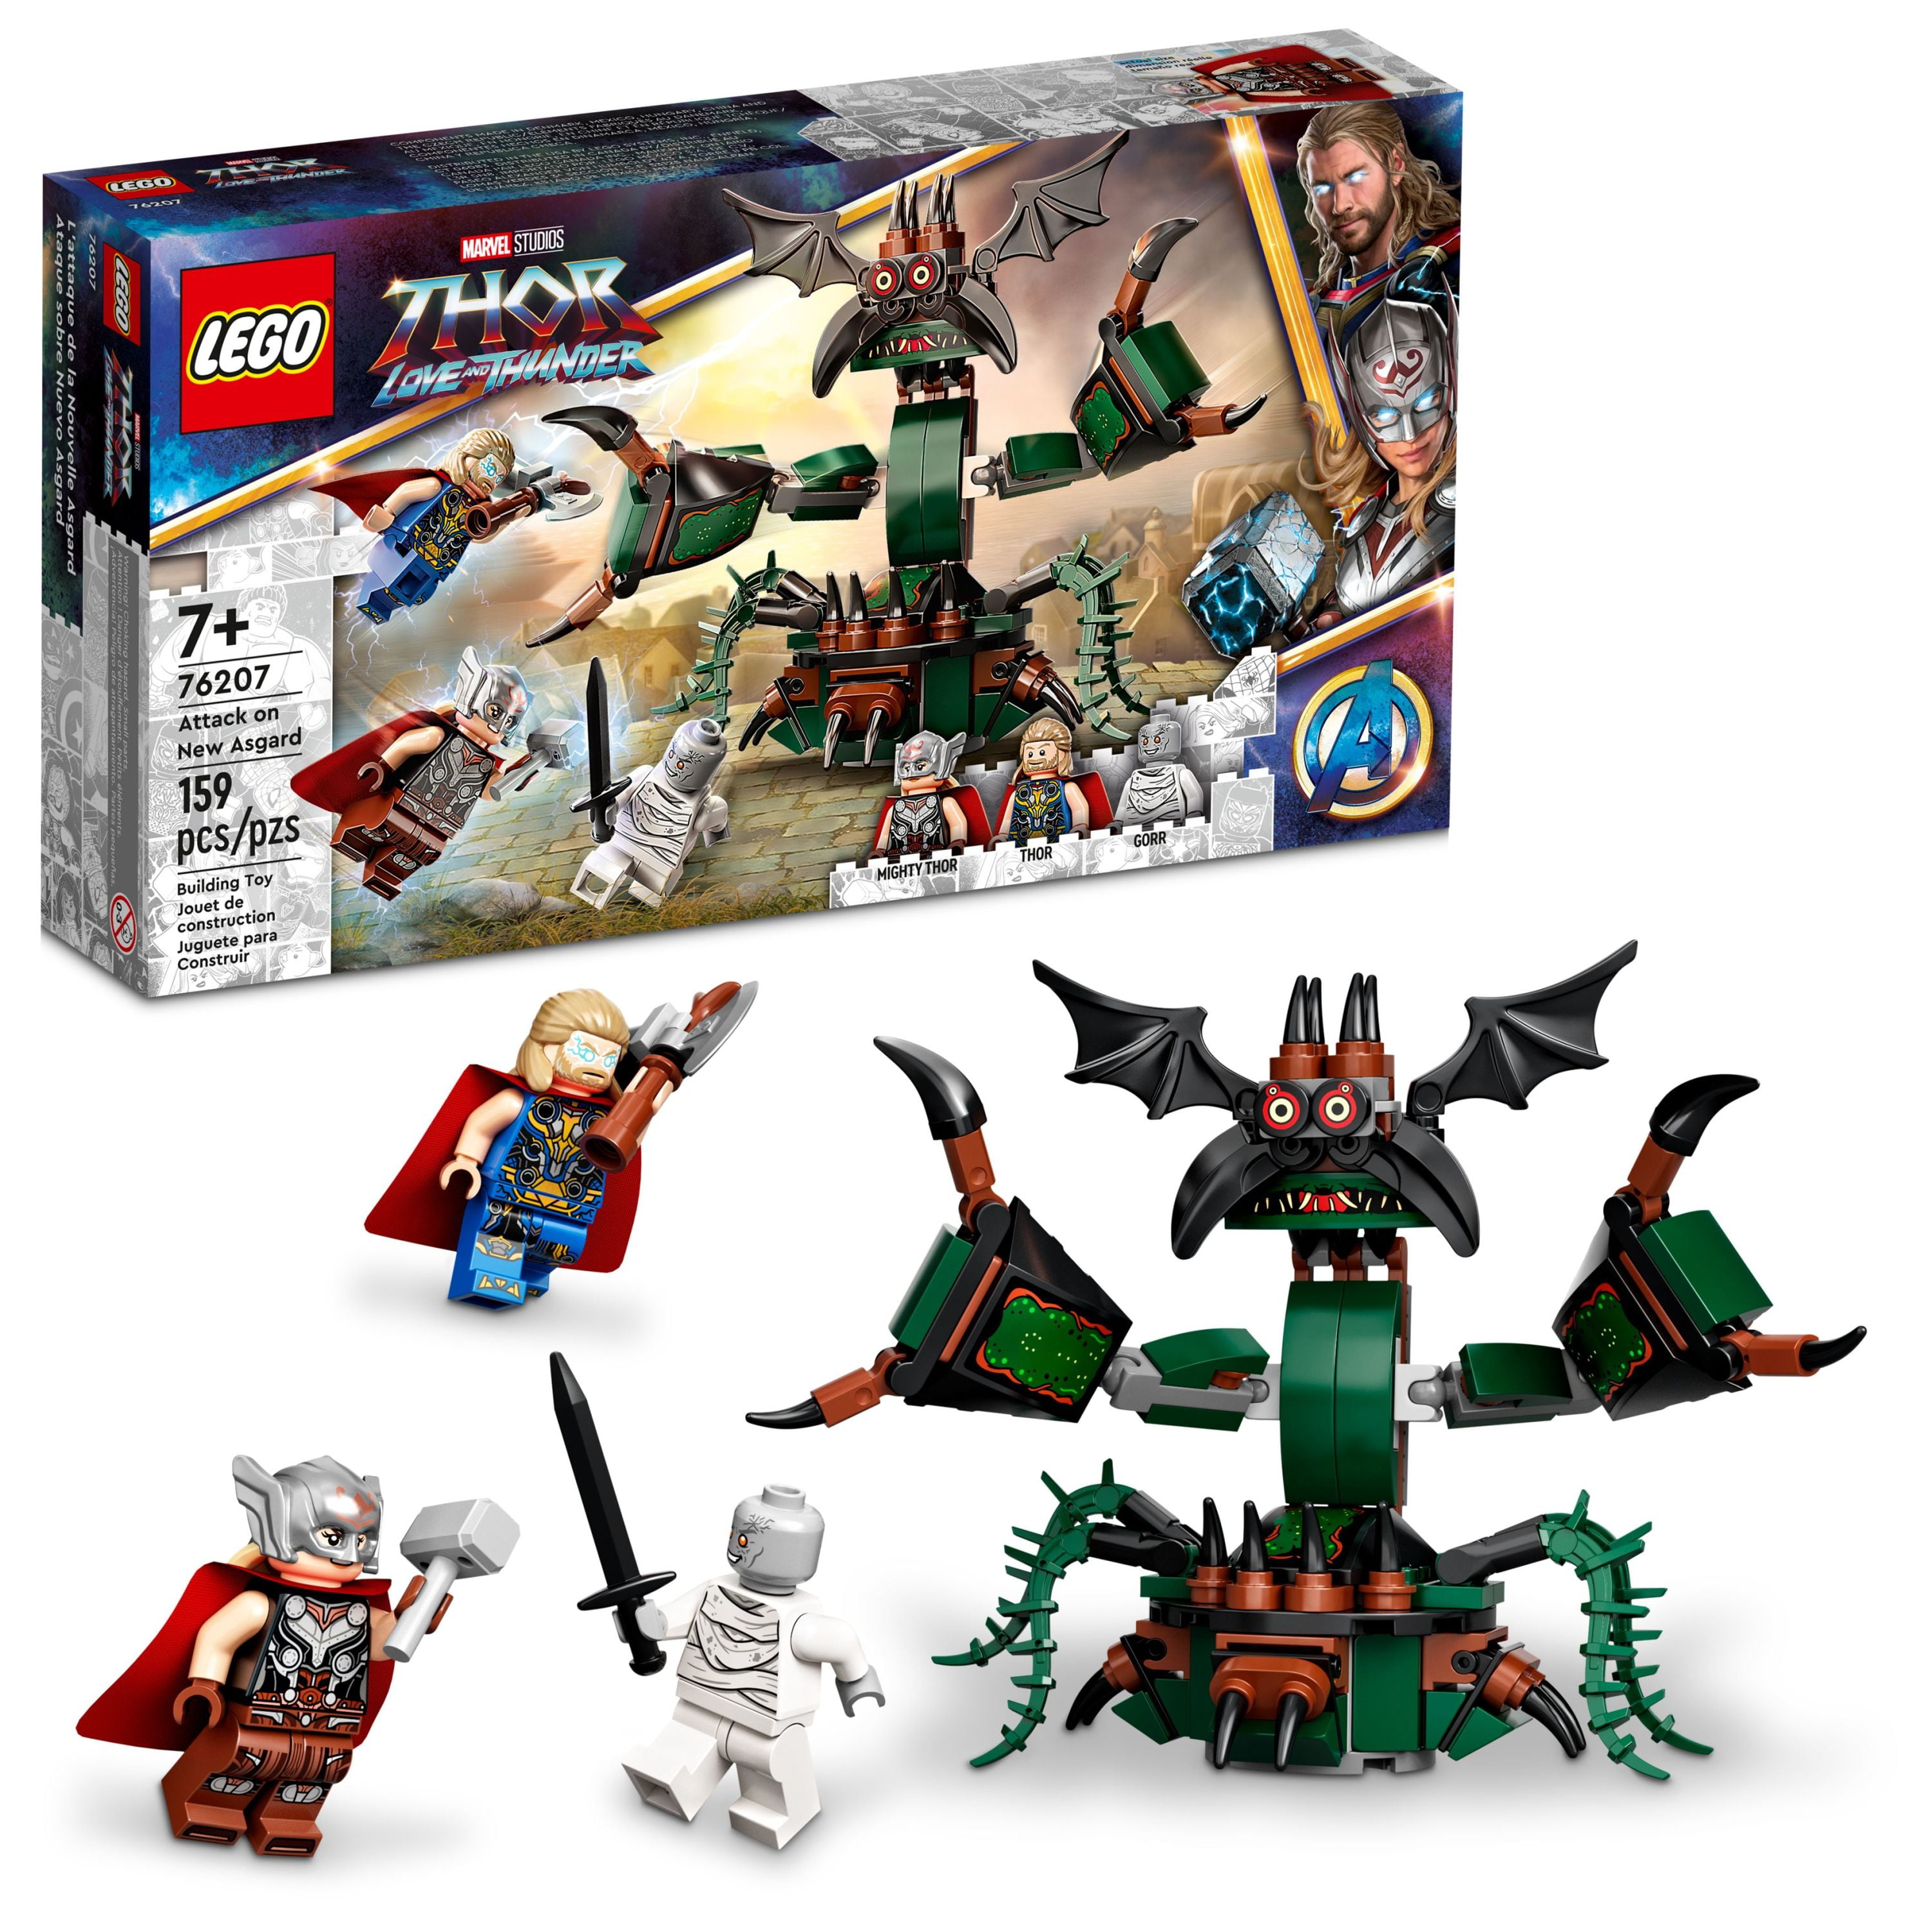 LEGO Marvel Attack Asgard, Buildable Toy 76207 with Hammer, Stormbreaker and Monster Figure, Love and Thunder Movie Set - Walmart.com